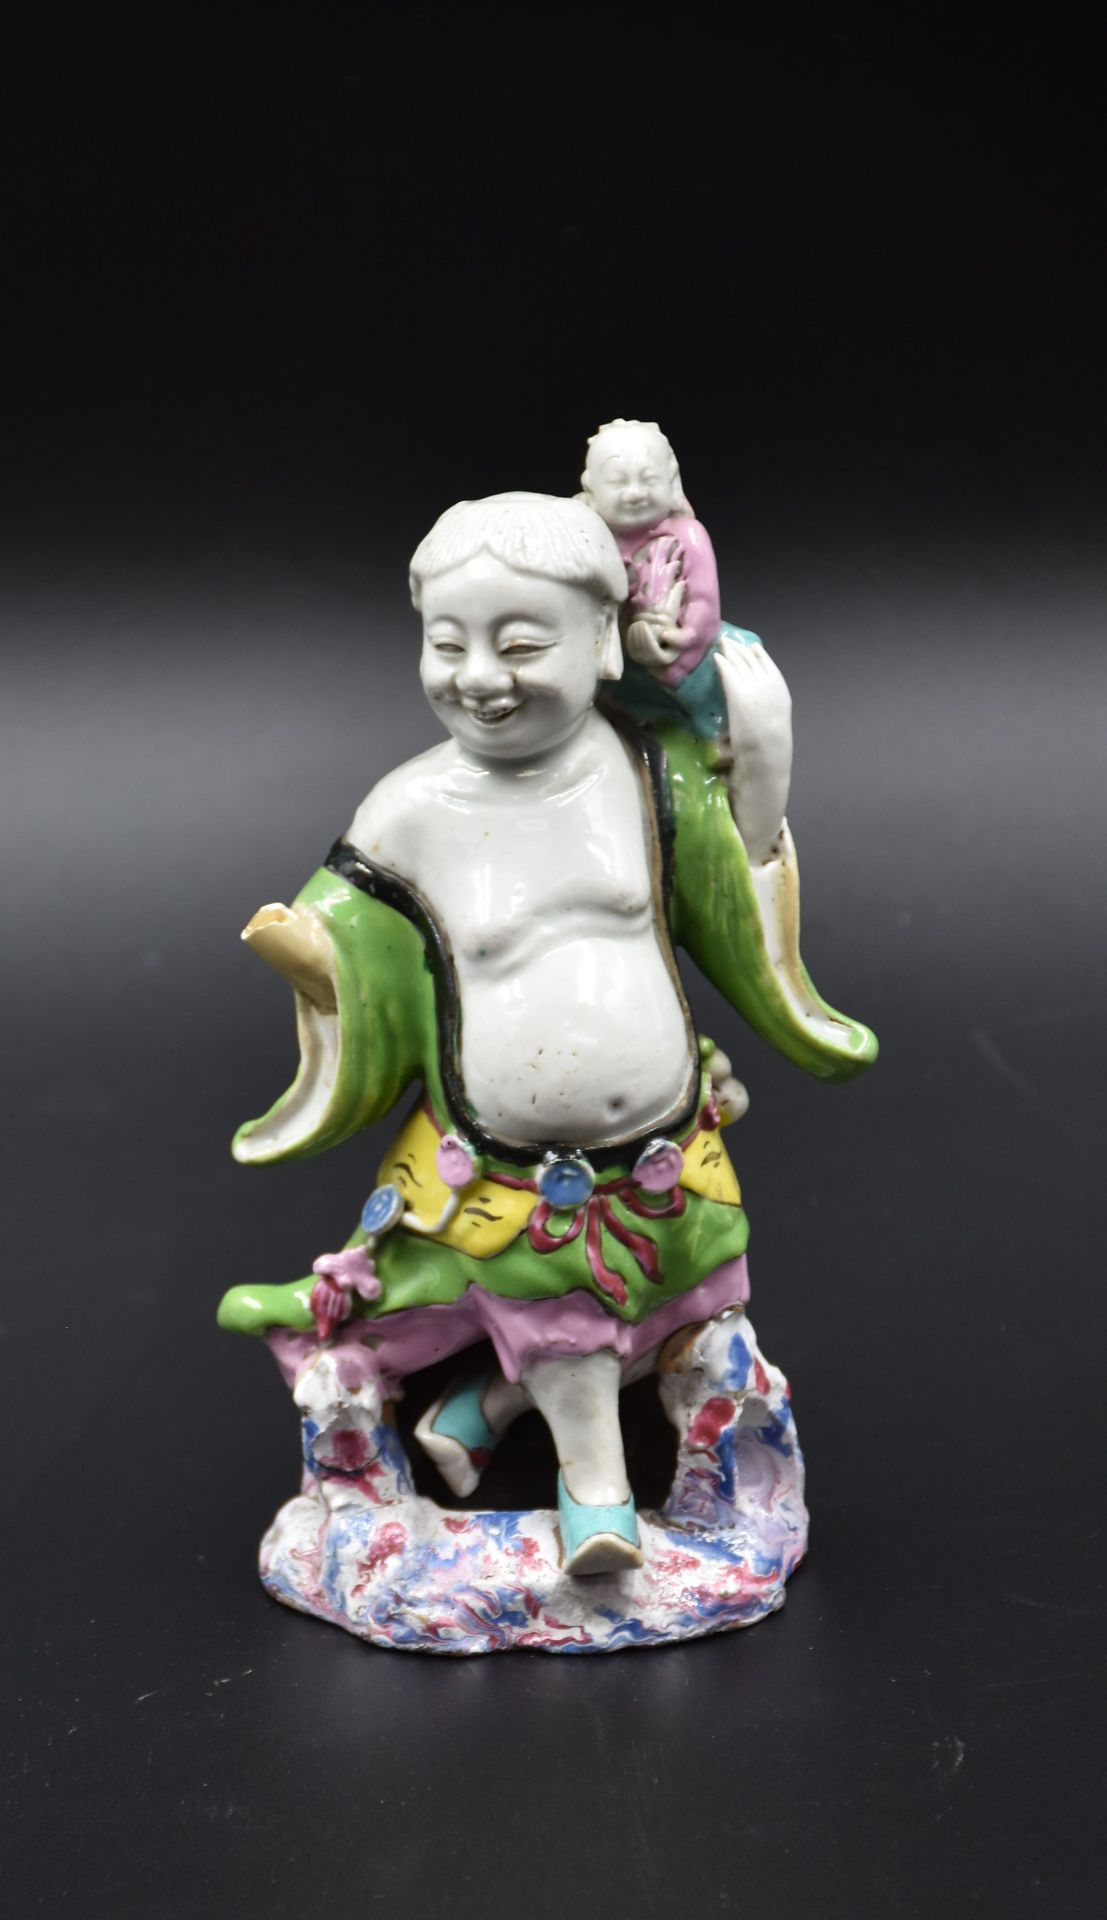 Chinese glazed stoneware polychrome subject. Kangxi period. Missing a hand. Height : 19 cm.